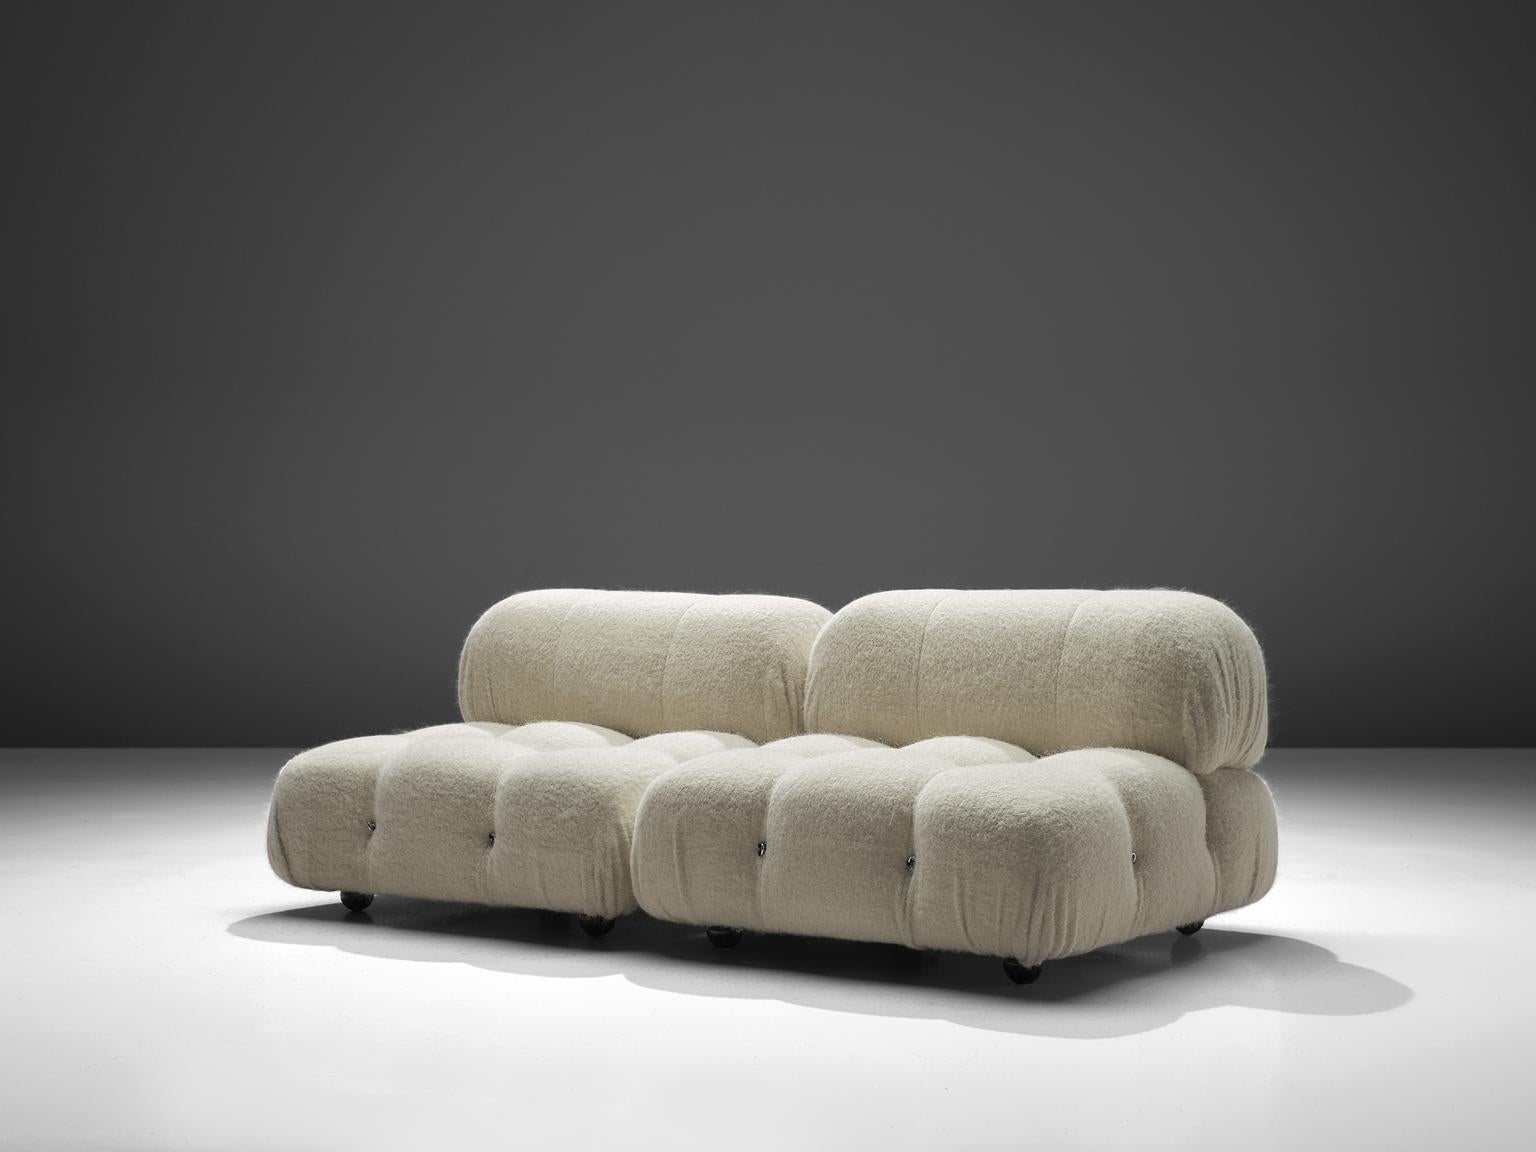 Mario Bellini, 'Camaleonda' sofa, in white Pierre Frey wool-mix upholstery, Italy, 1972.

These sofa elementen are made on request in our upholstery atelier and consists of two large elements and two back rests. The sectional elements this sofa was